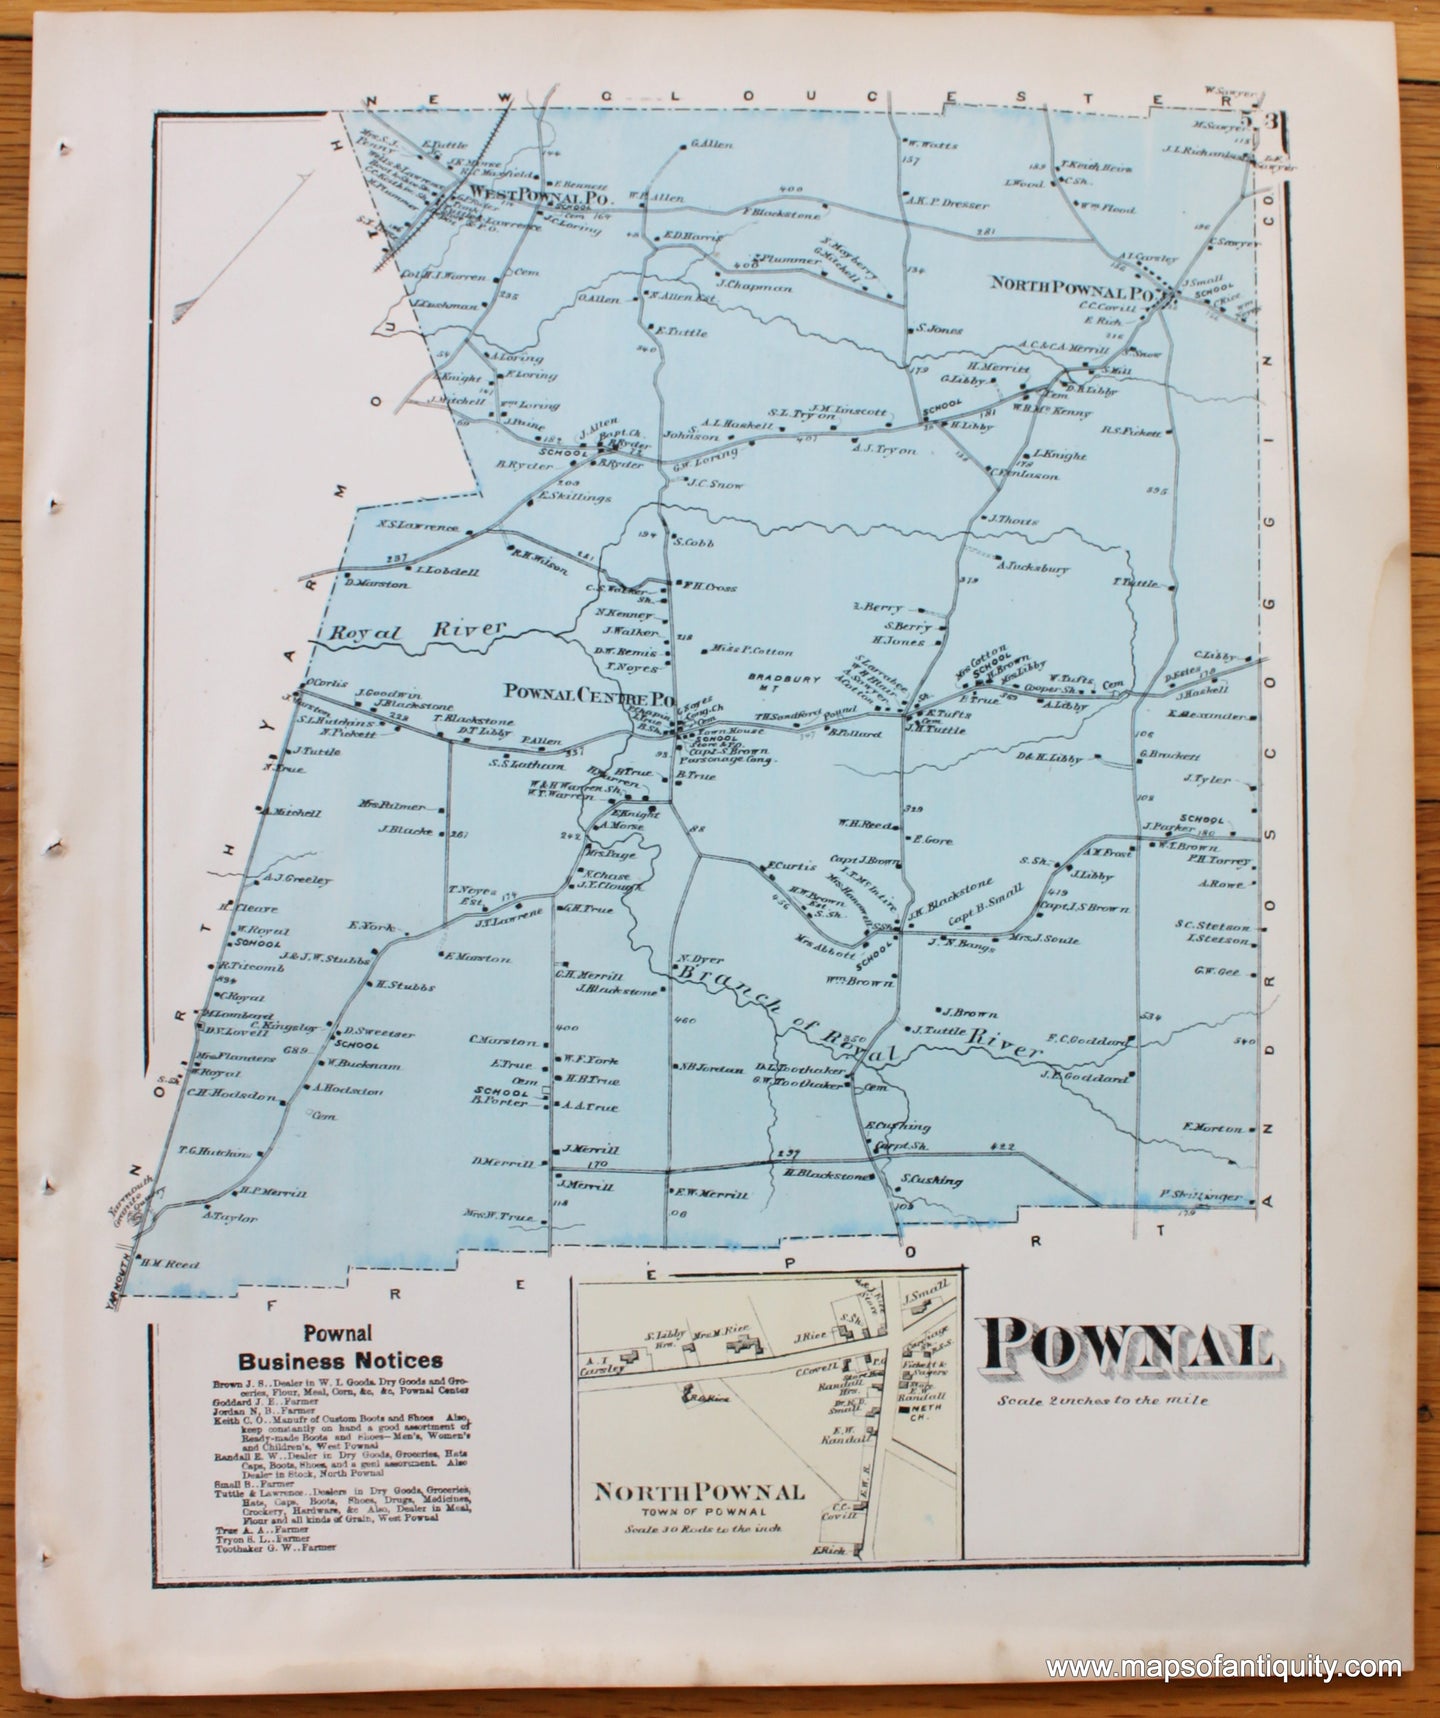 Antique-Map-Town-City-Village-Pownal-North-Cumberland-County-Maine-Beers-1871-1870s-1800s-Mid-Late-19th-Century-Maps-of-Antiquity